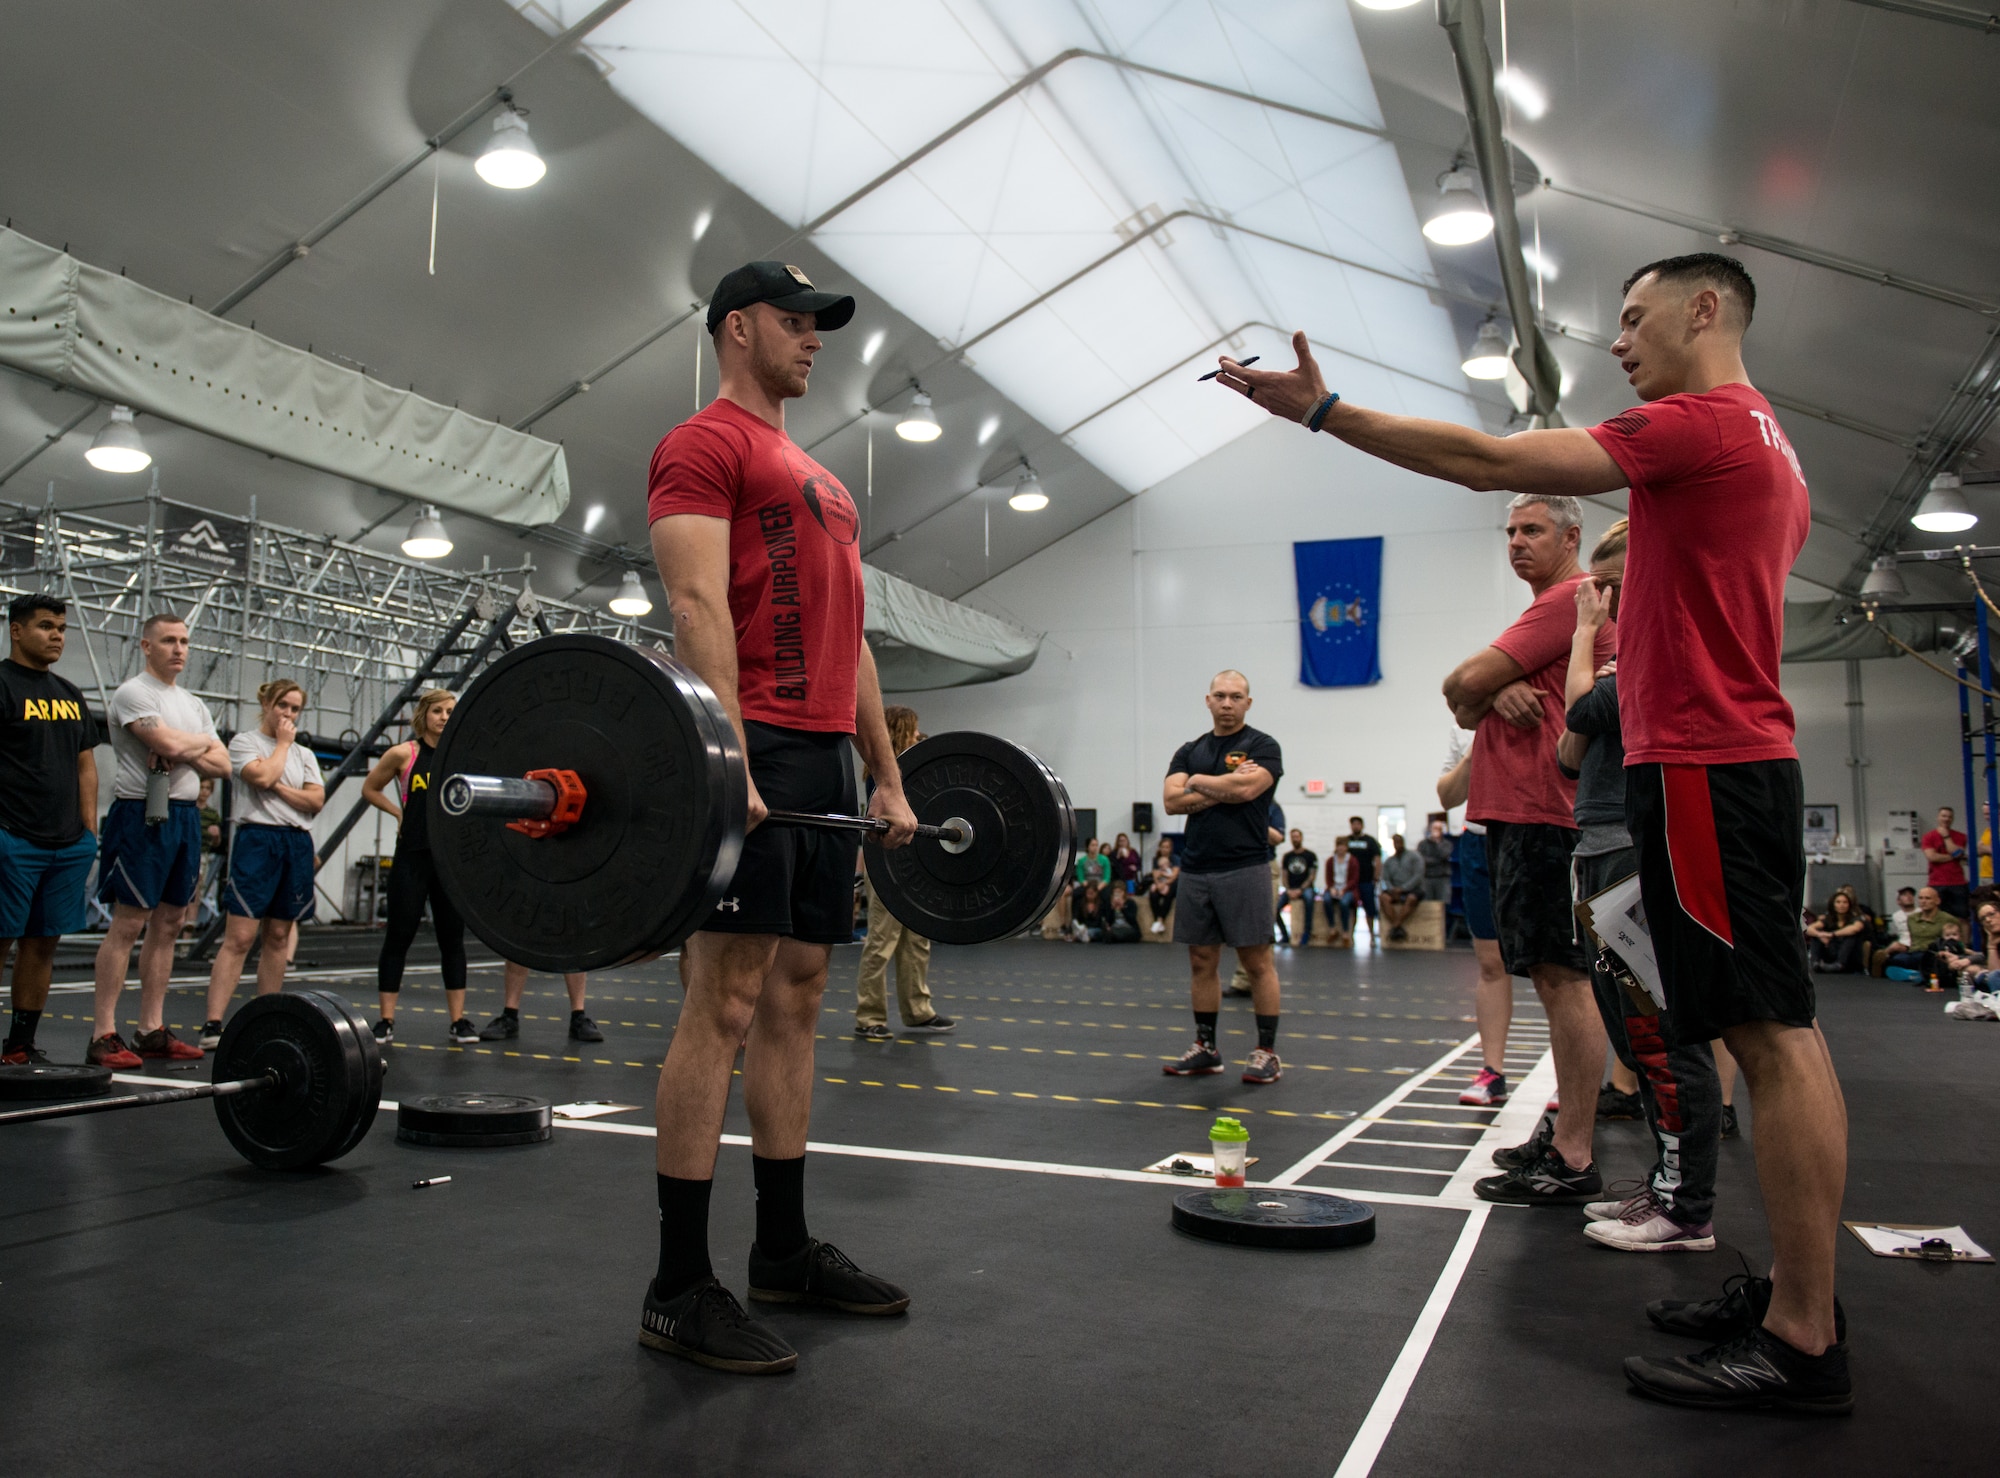 Senior Airman Taylor Keller, 56th Equipment Maintenance Squadron aerospace ground equipment technician, performs a deadlift to demonstrate proper form during the 2018 Reebok CrossFit Games Open 18.4 at Luke Air Force Base, Ariz., March 15, 2018. The open is the first stage of the CrossFit Games season and the largest community CrossFit event of the year. (U.S. Air Force photo by Airman 1st Class Alexander Cook)